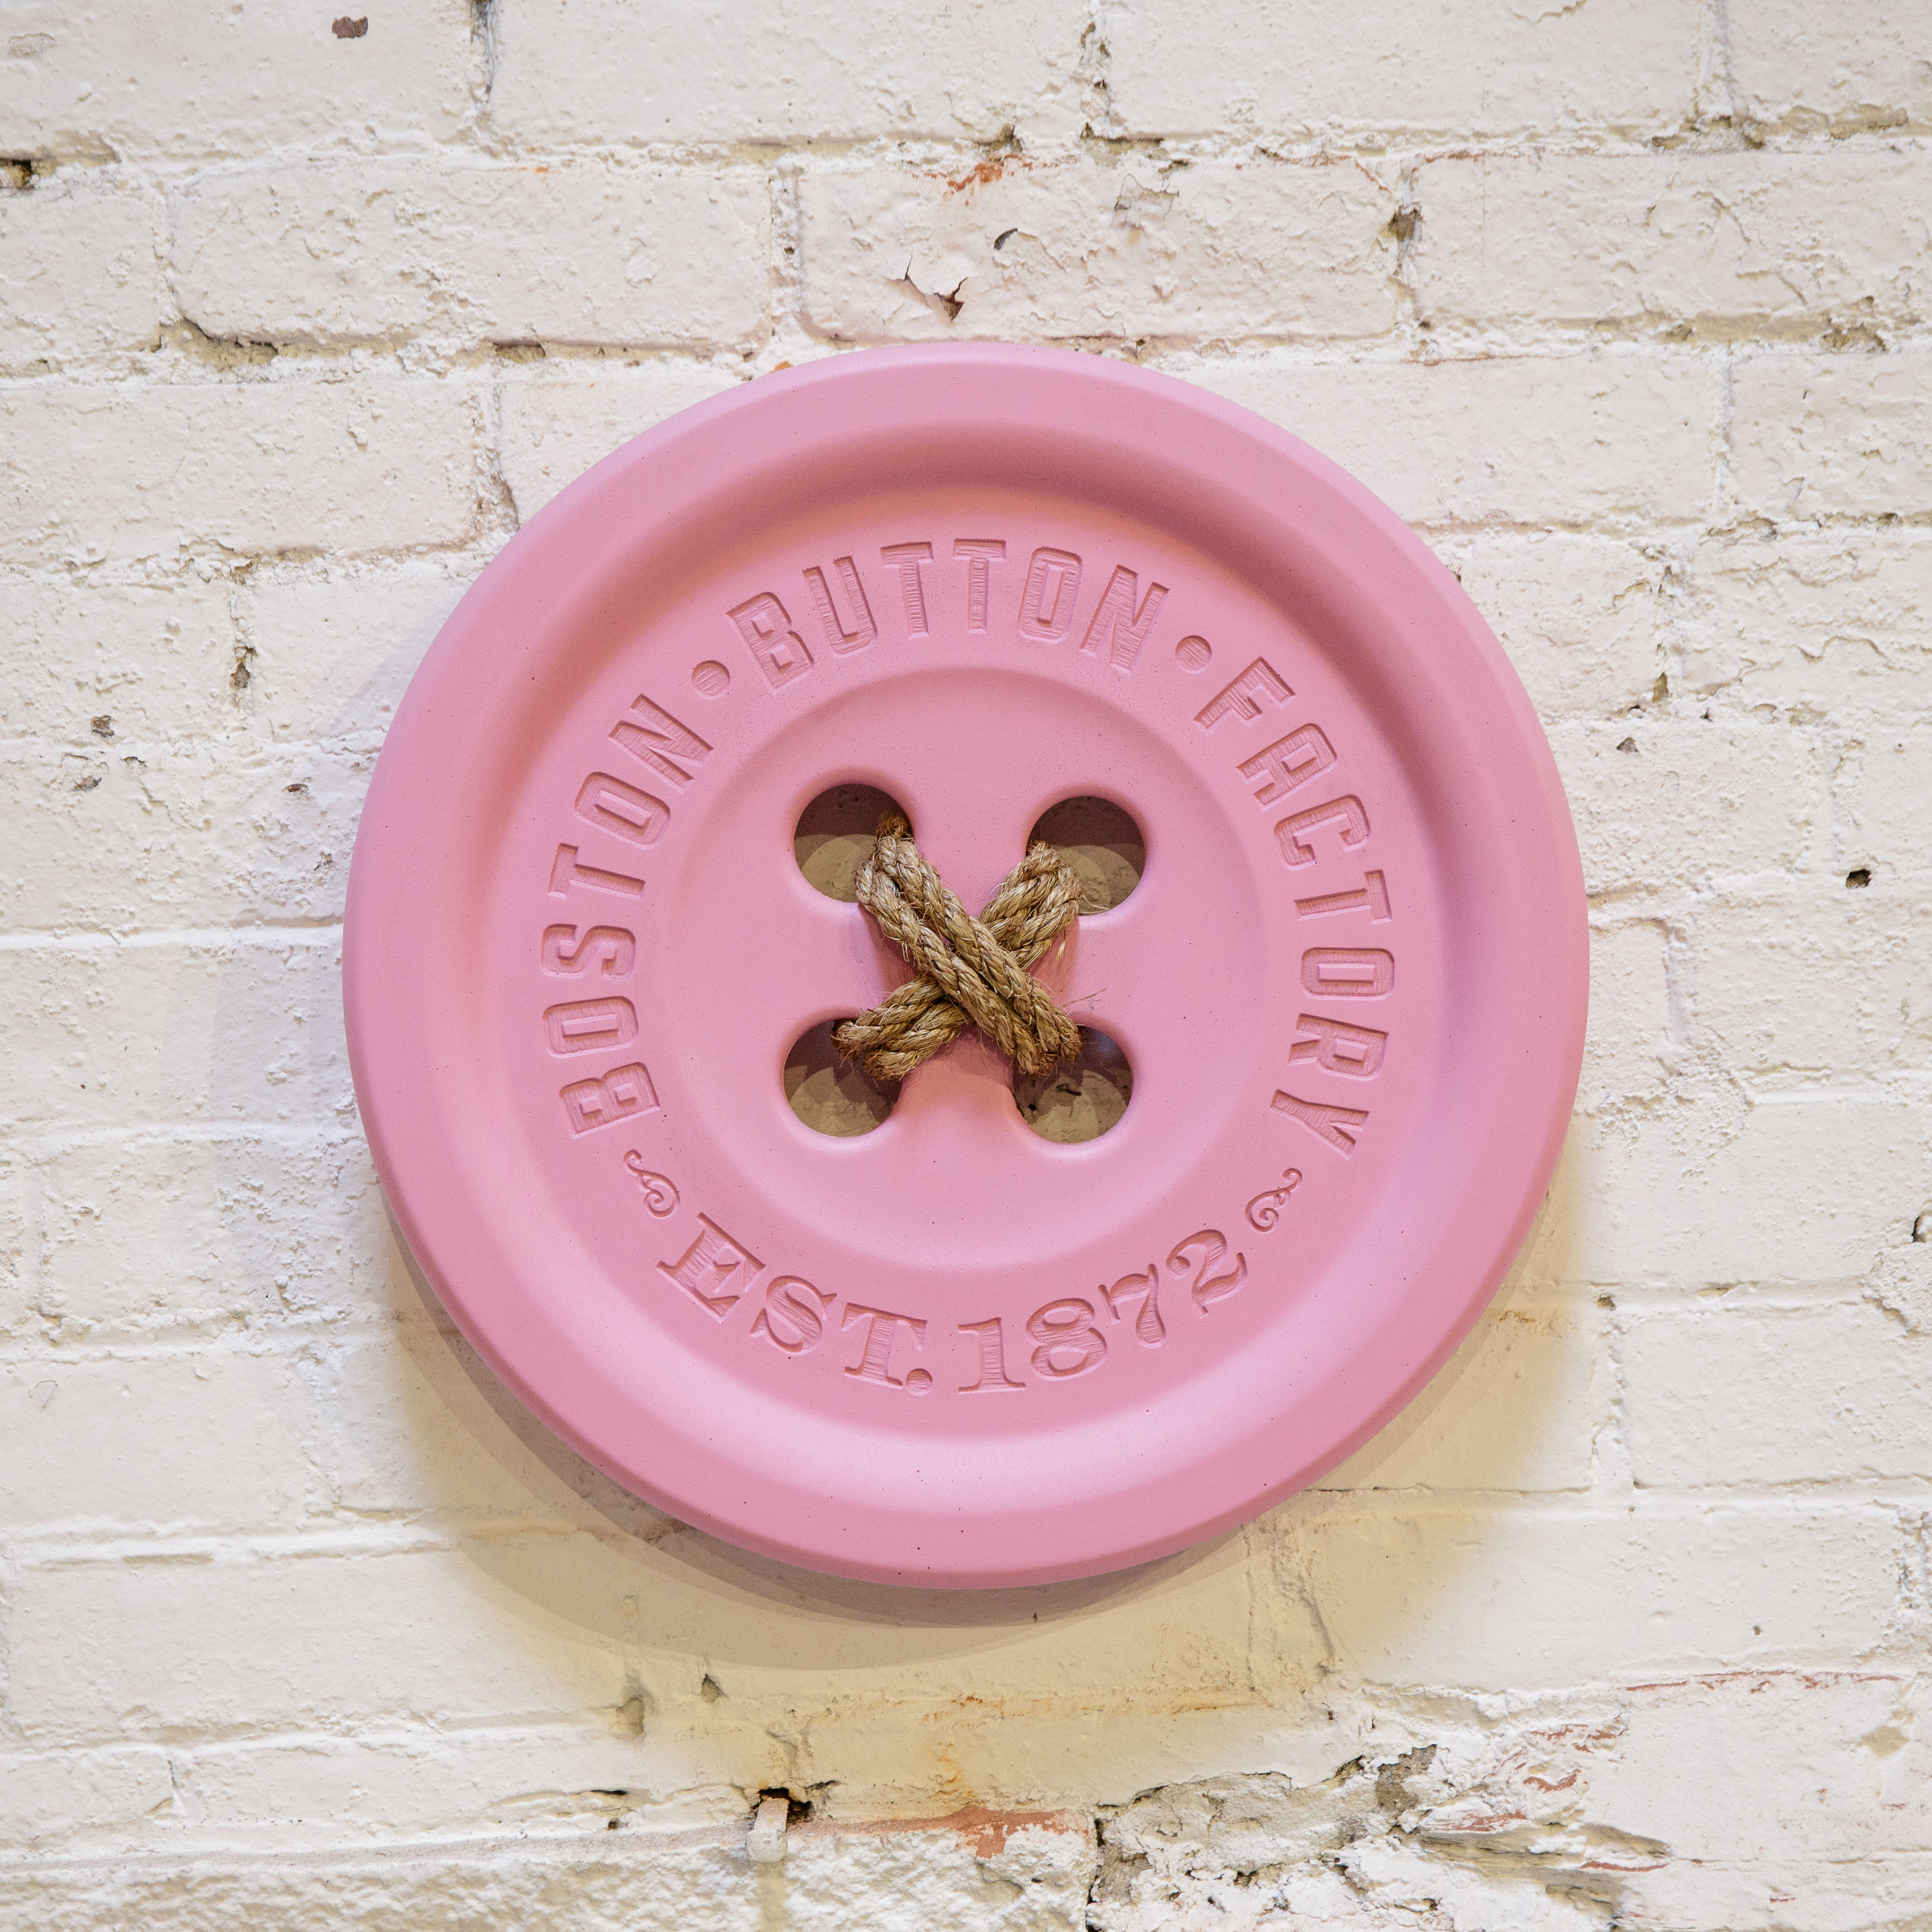 Boston Button Factory Pink Button- Wall Art for your Home or Office